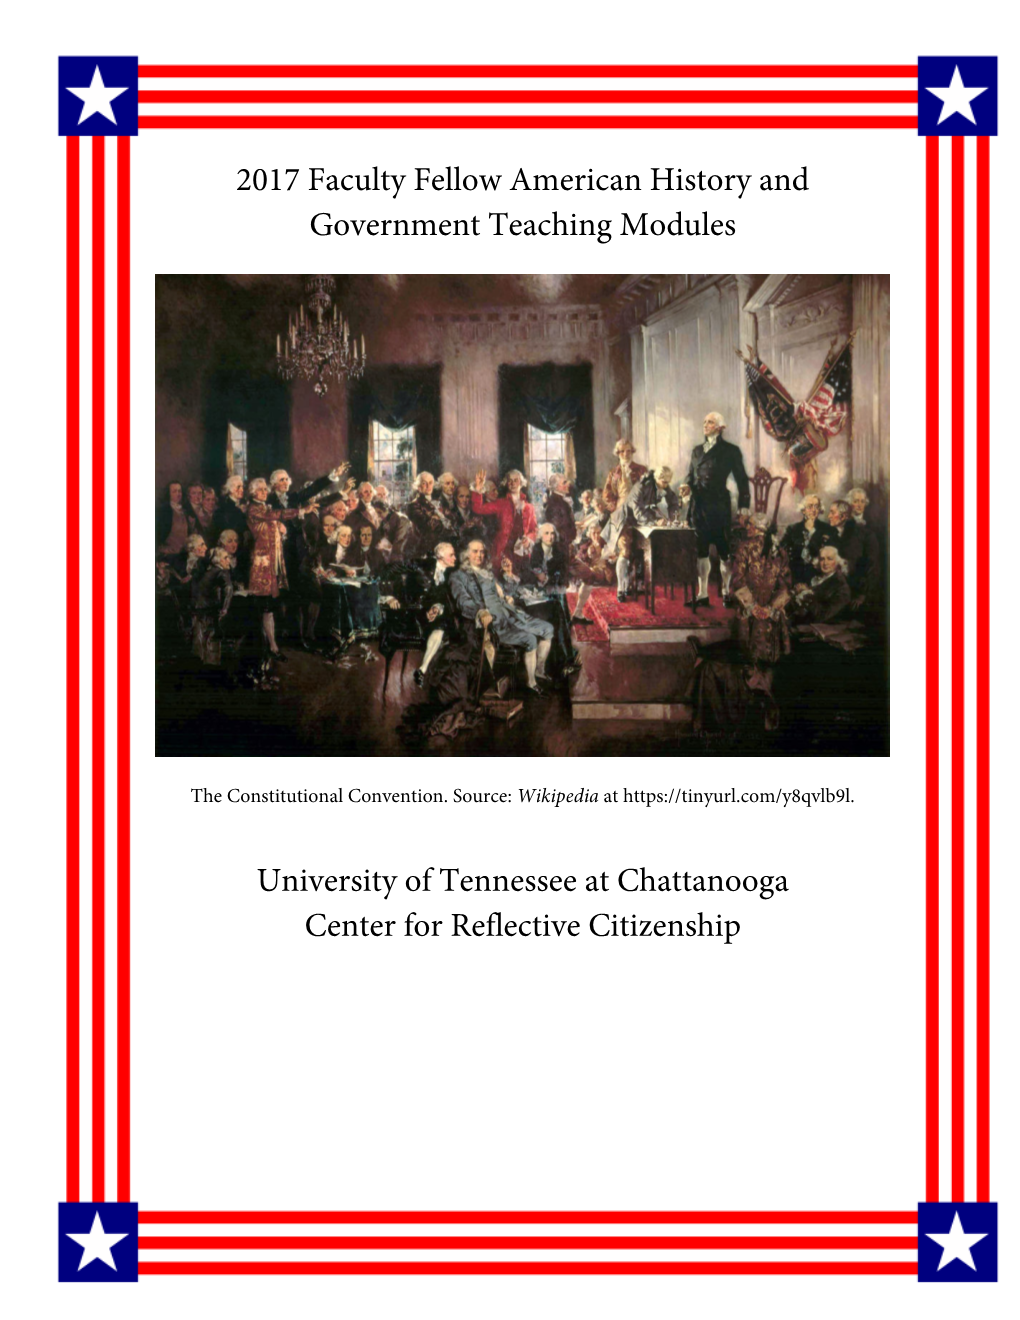 2017 Faculty Fellow American History and Government Teaching Modules